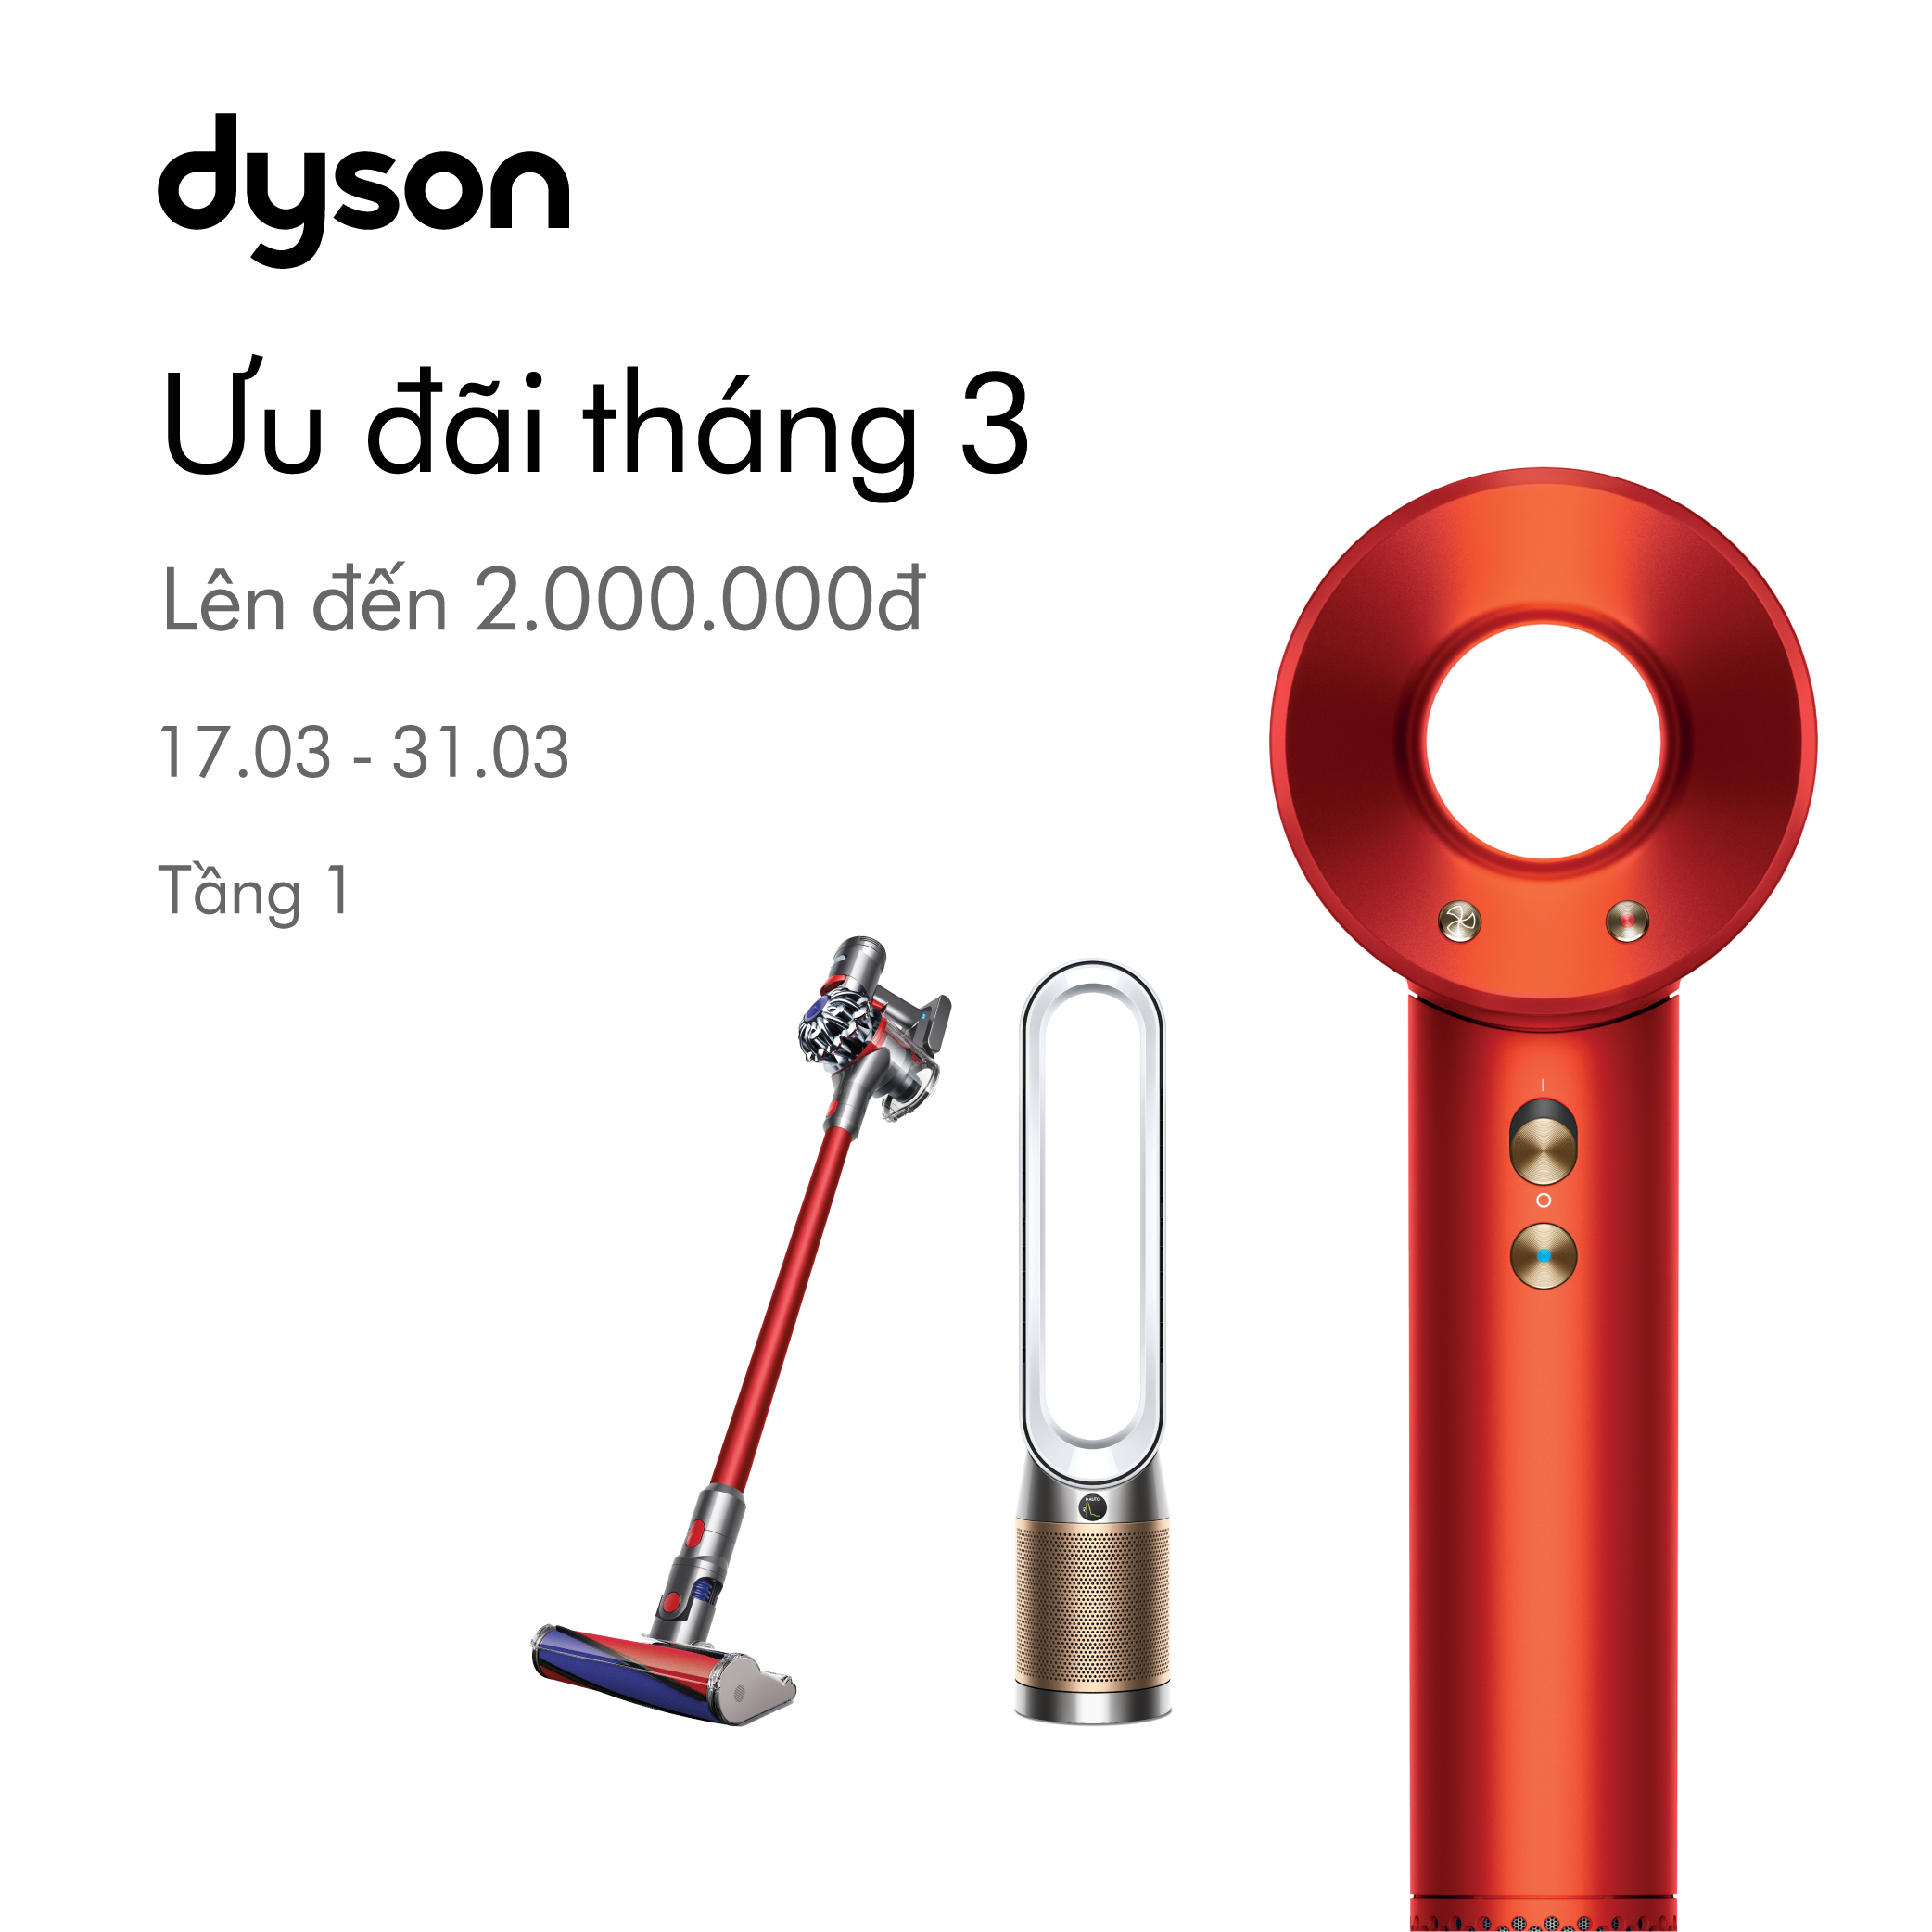 💥EXCLUSIVE GIFTS AND OFFERS WORTH UP TO 2.000.000 VND FROM DYSON TECHNOLOGY